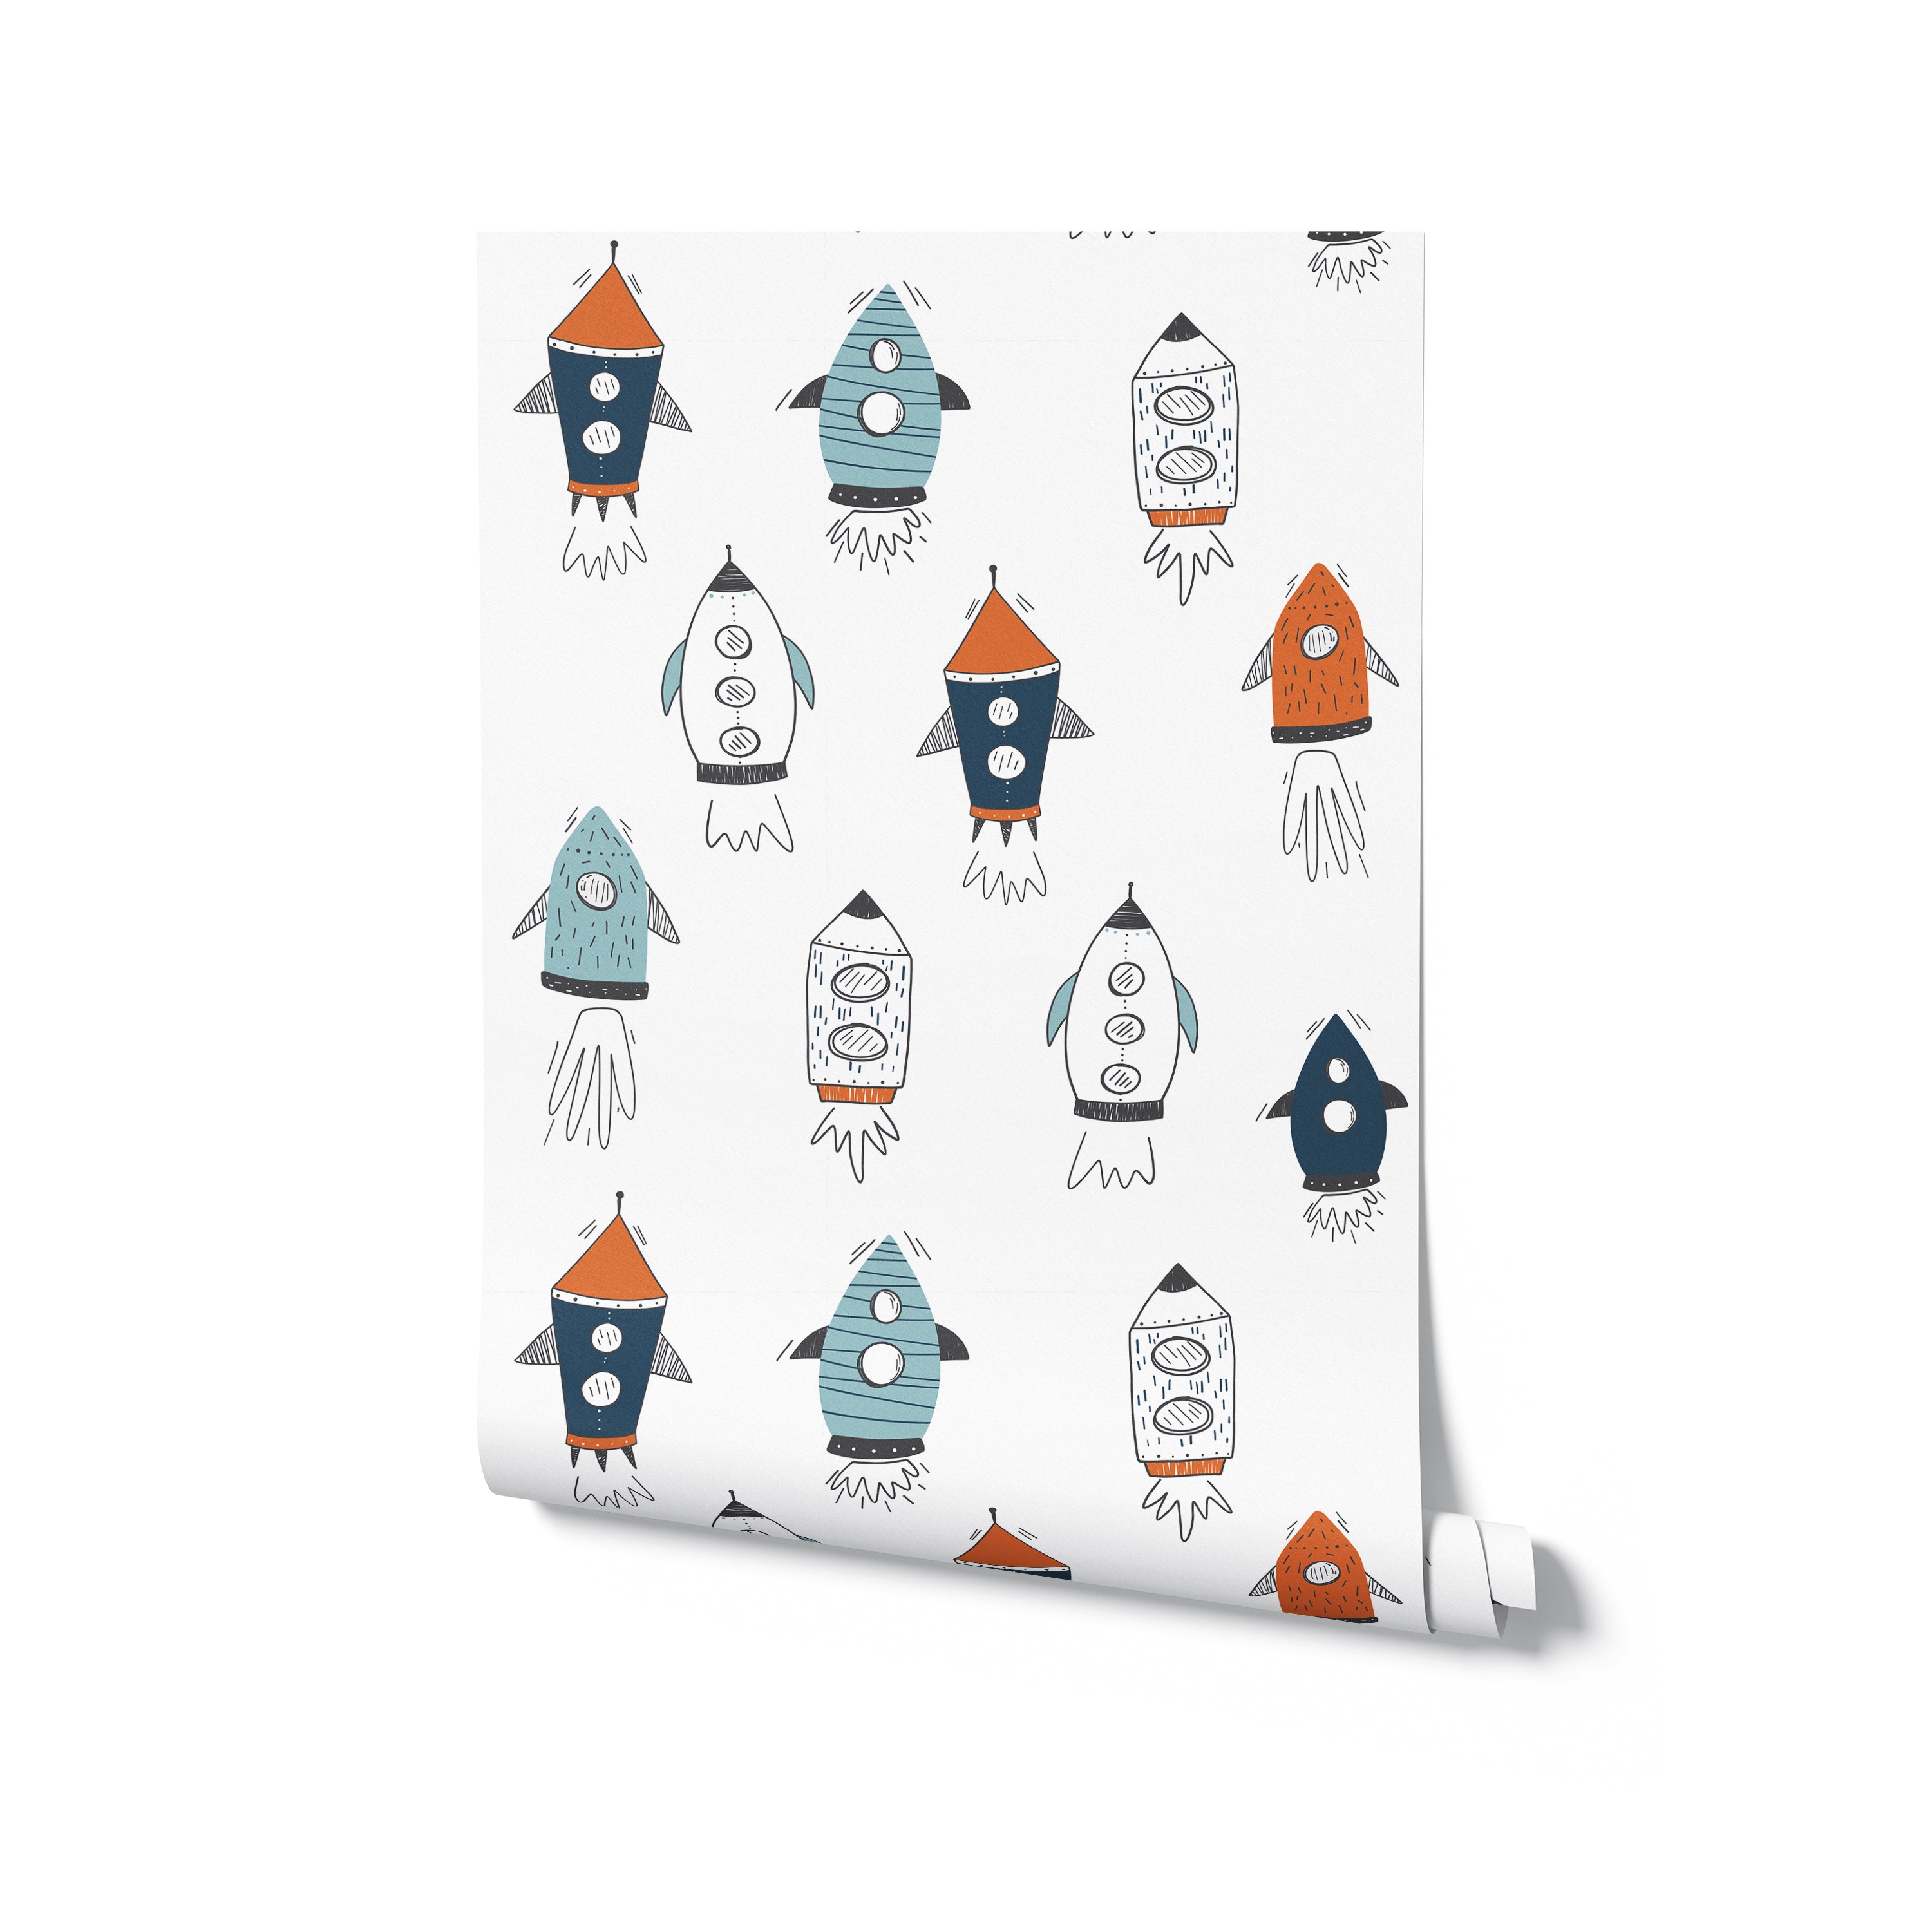 A rolled wallpaper featuring hand-drawn rockets in orange, teal, and navy on a white background, ideal for children's rooms